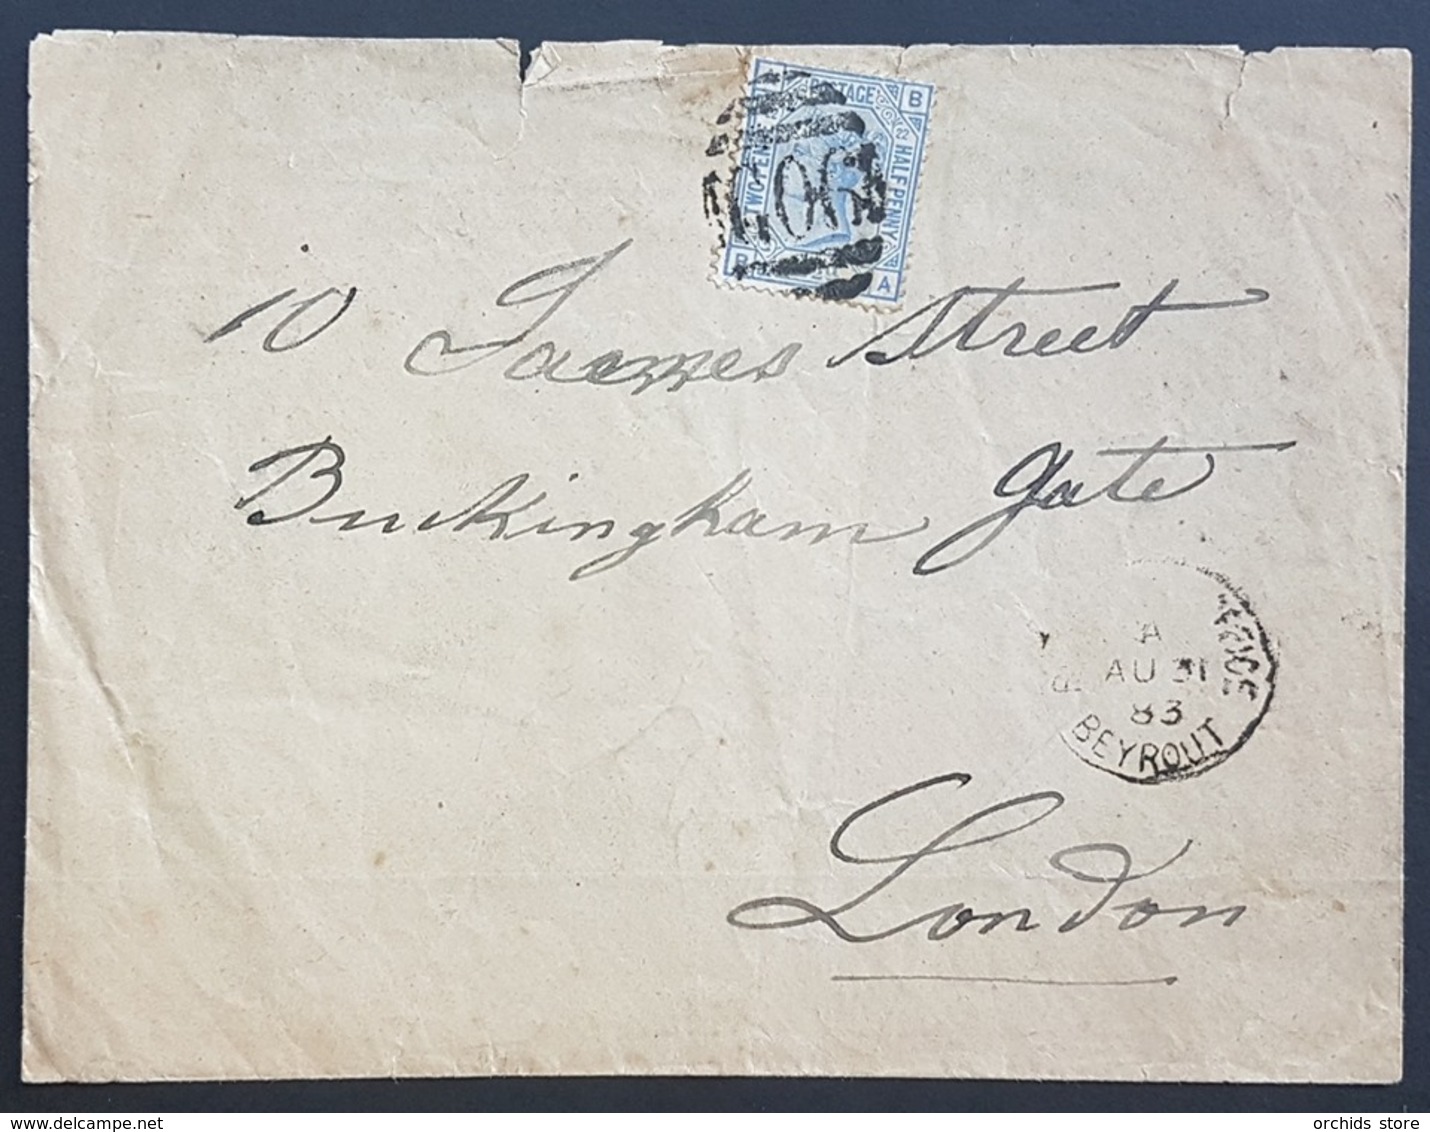 SC - 1883 British Levant Offices Cover Sent From BEYROUT "G06" To London. Rare Cancel ".G06" - Lebanon